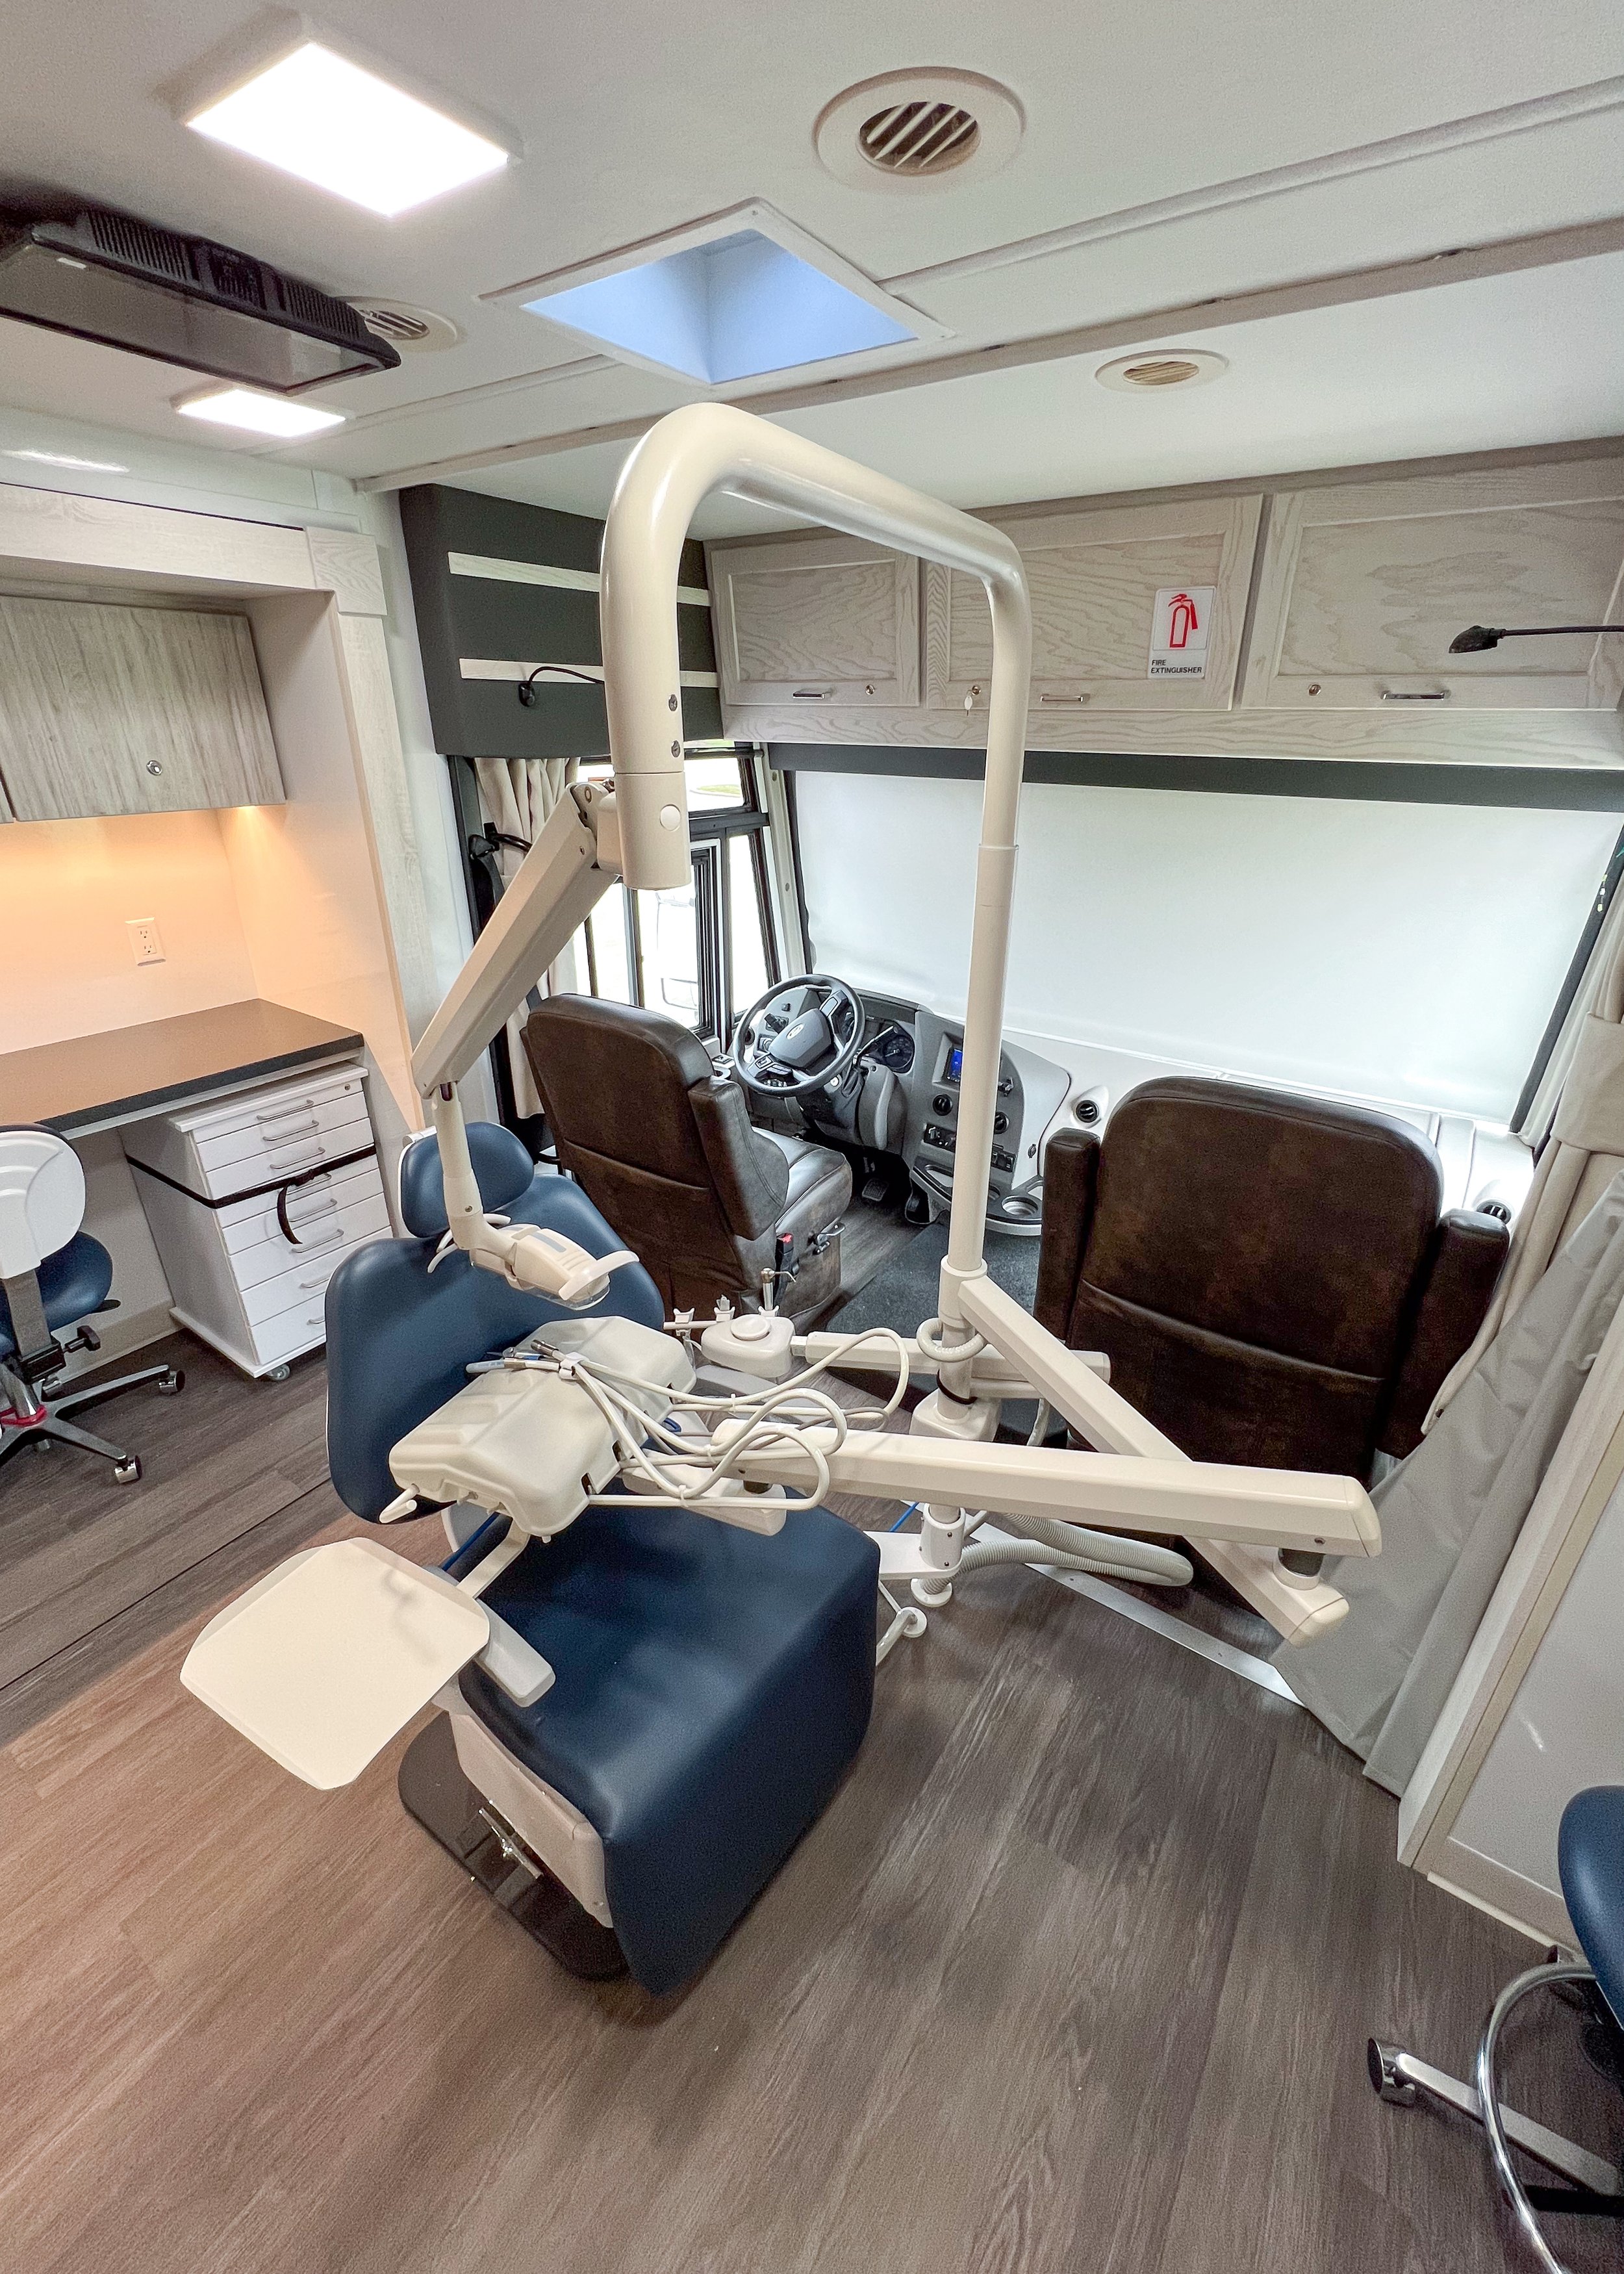  Dental chair (stowed for transport) and cab in background (with windshield privacy shade down). 